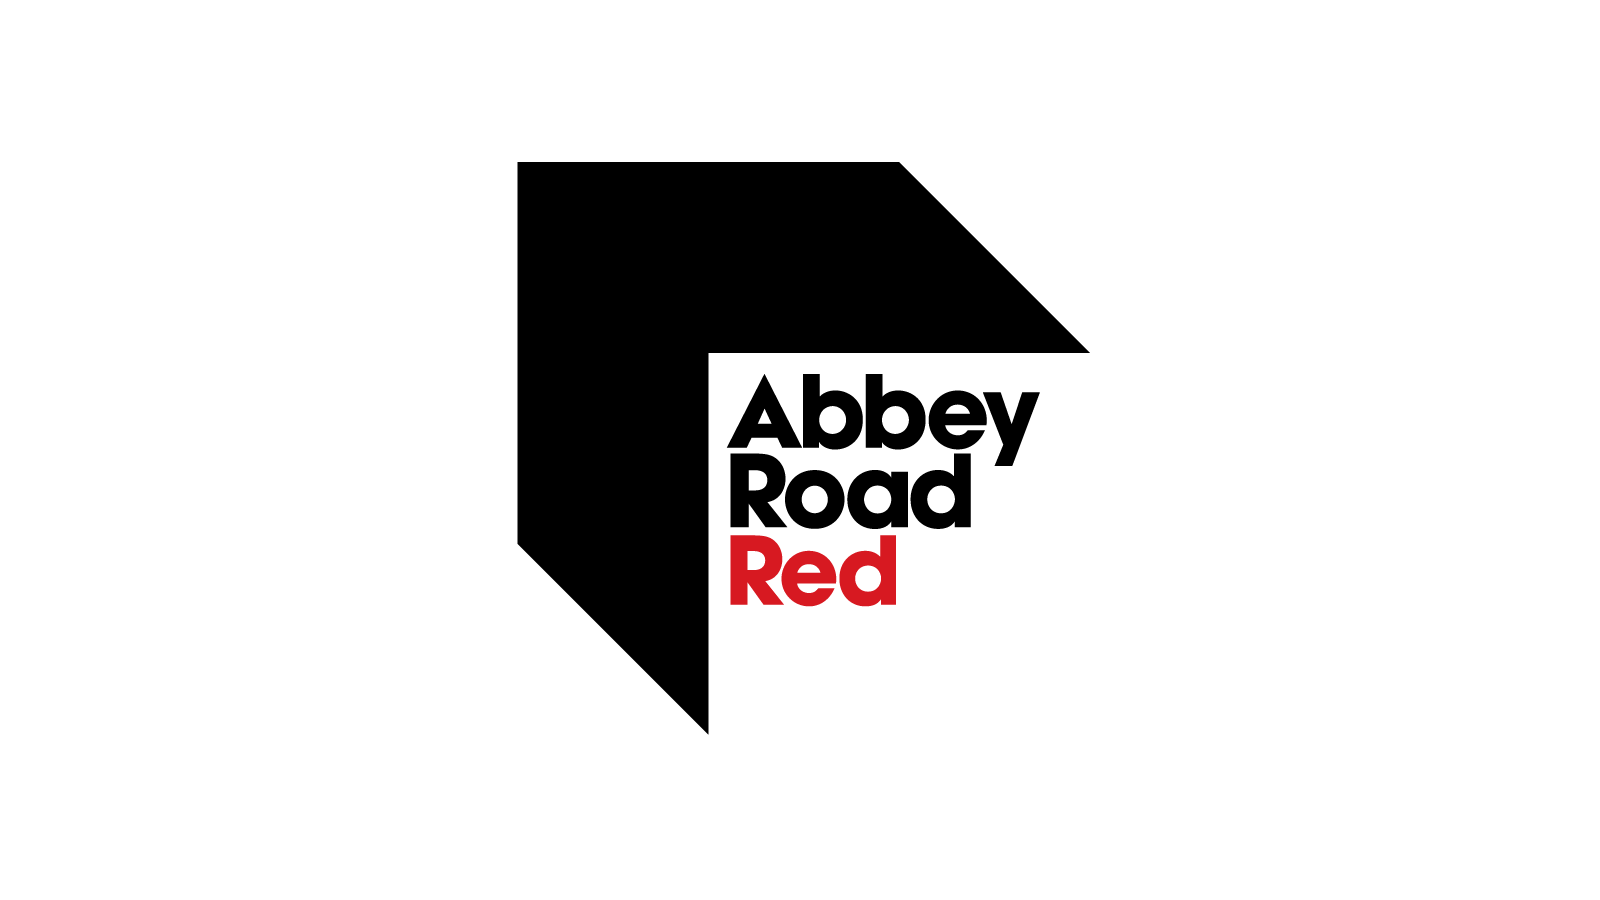 November 9-10: L-ISA partners with Abbey Road Red for “The Power of Immersion” Hackathon